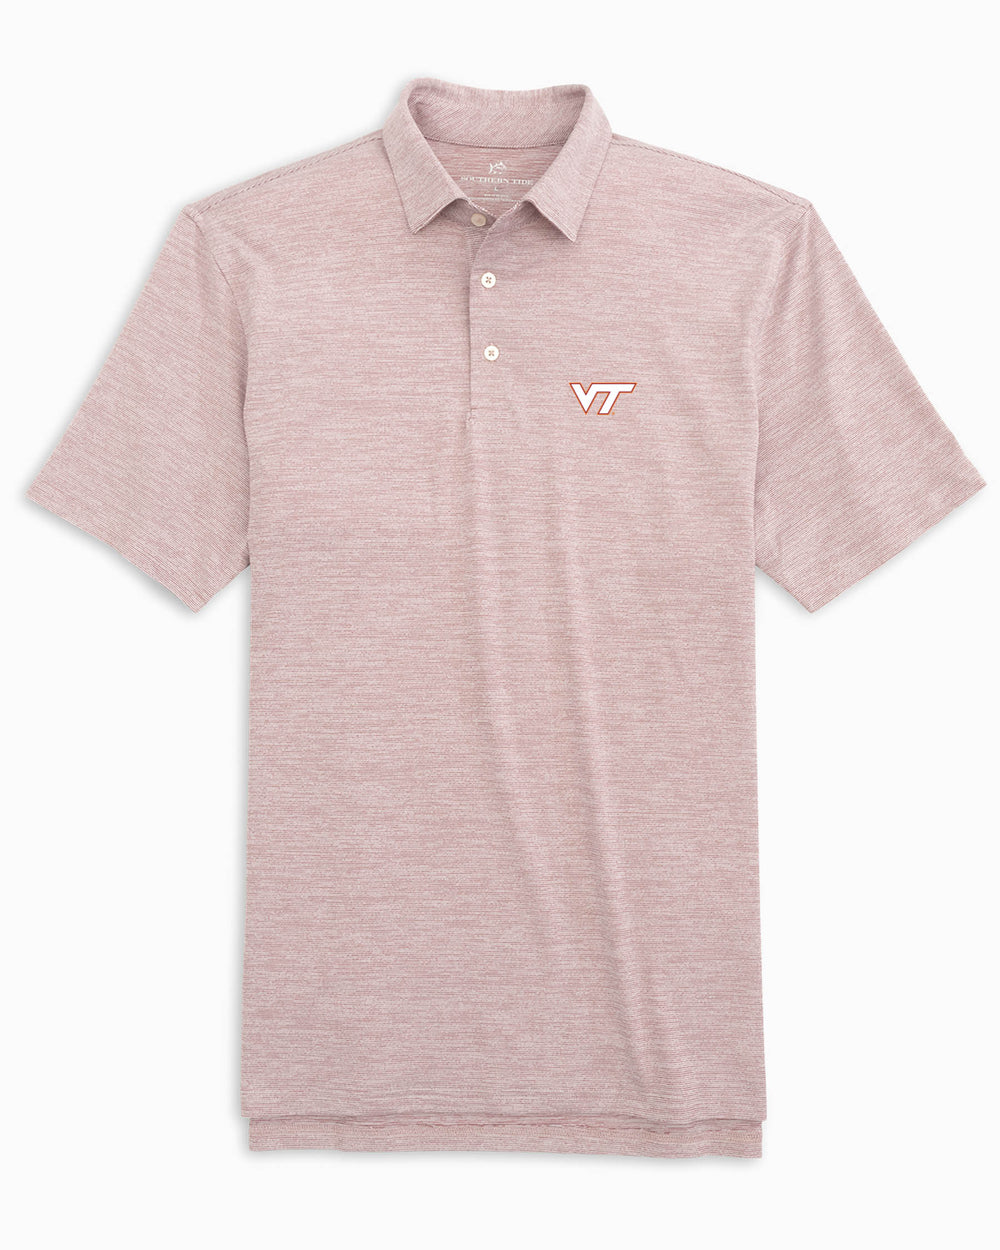 The front view of the Virginia Tech Hokies Driver Spacedye Polo Shirt by Southern Tide - Chianti